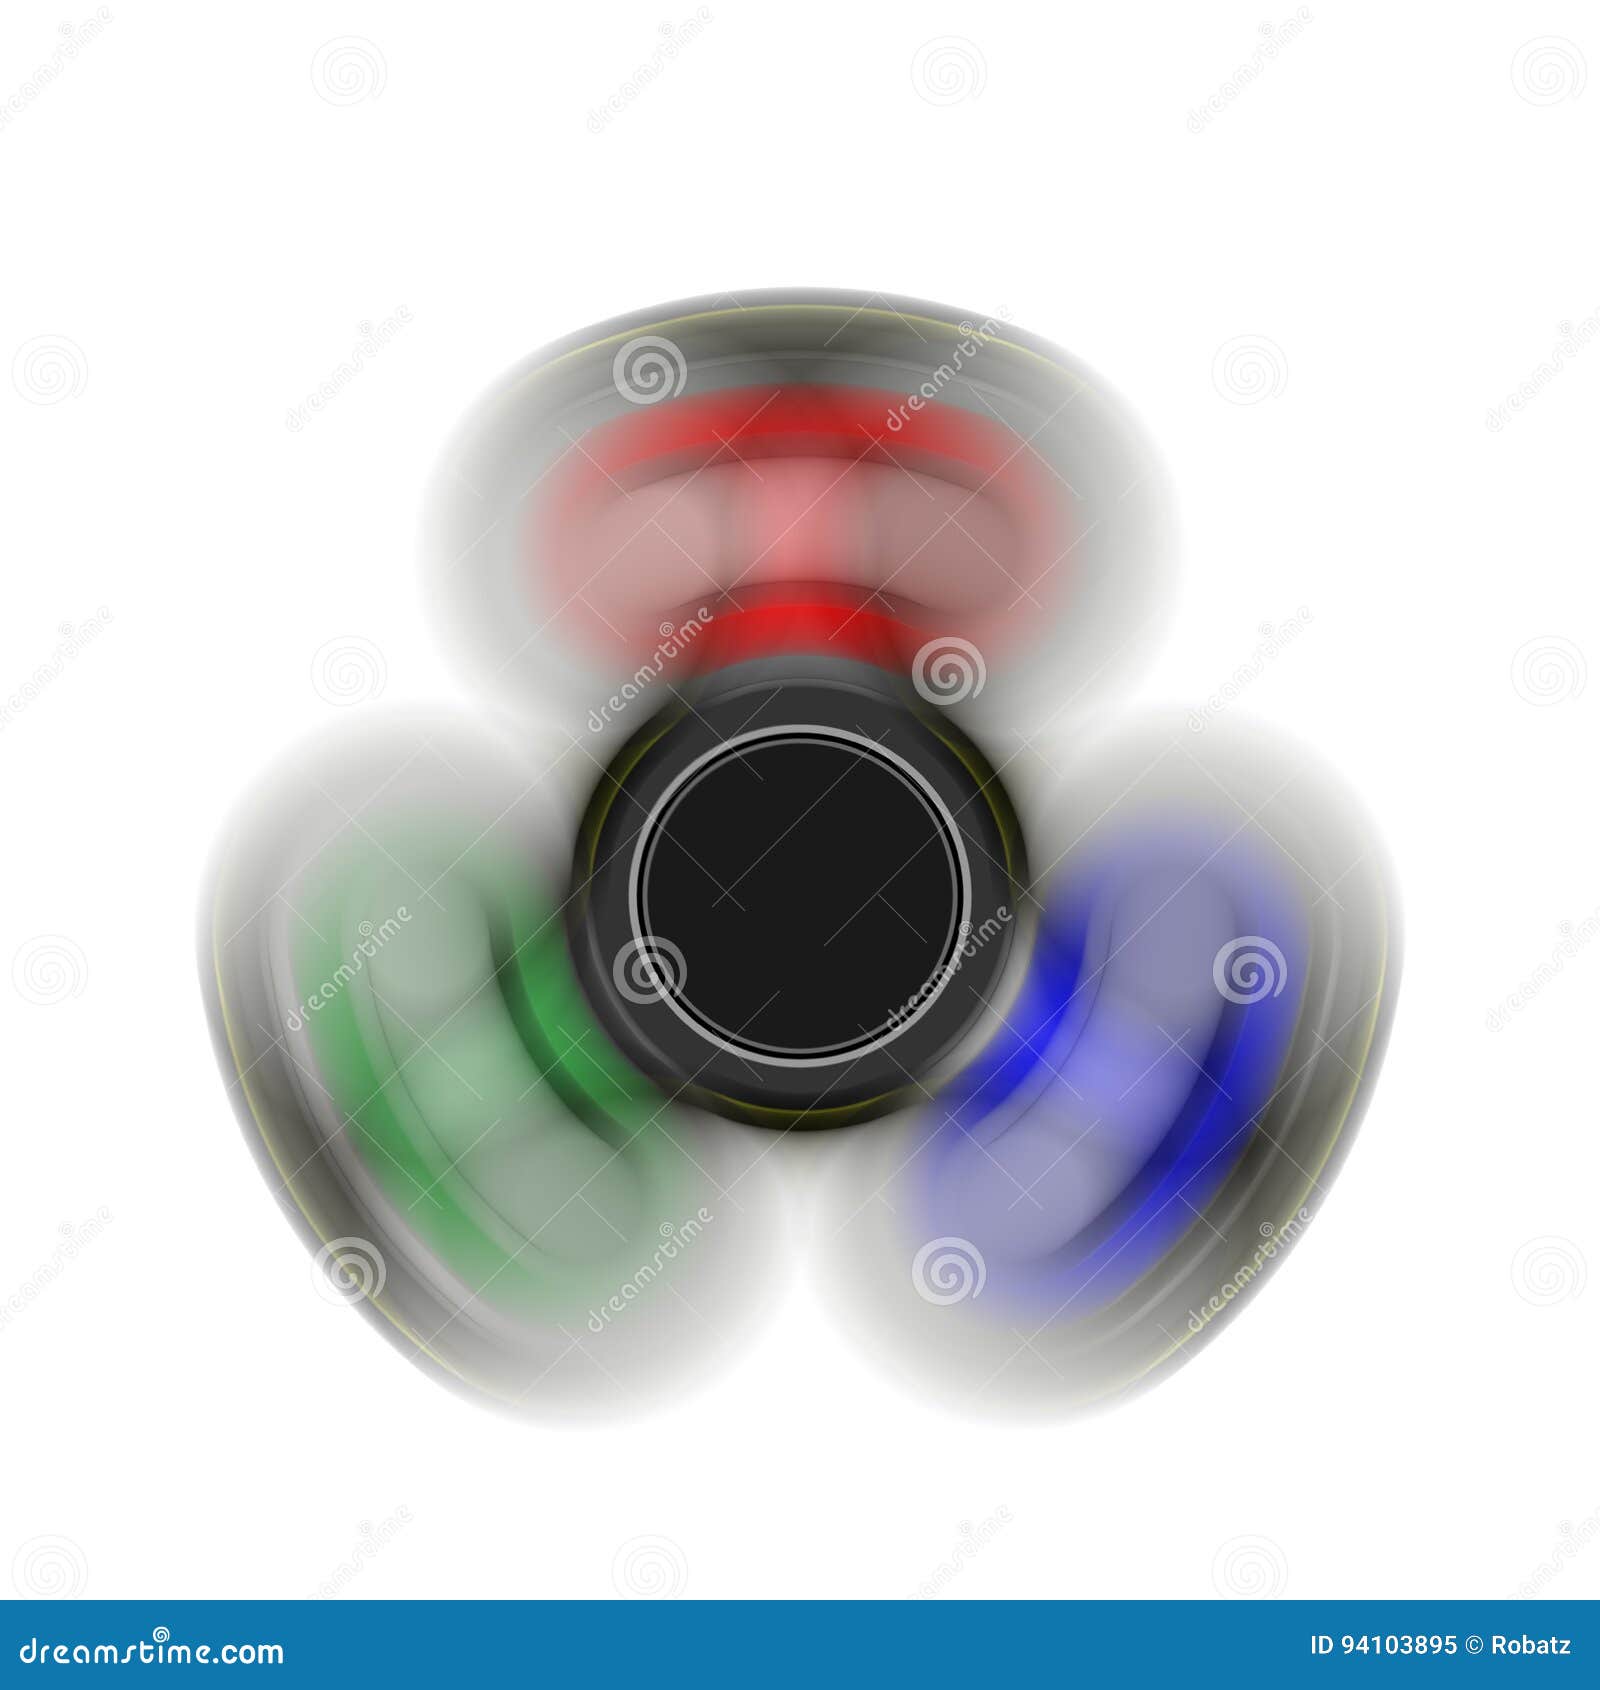 fidget spinner on the move - toy moving for stress relief and attention enhancement. 3d render 